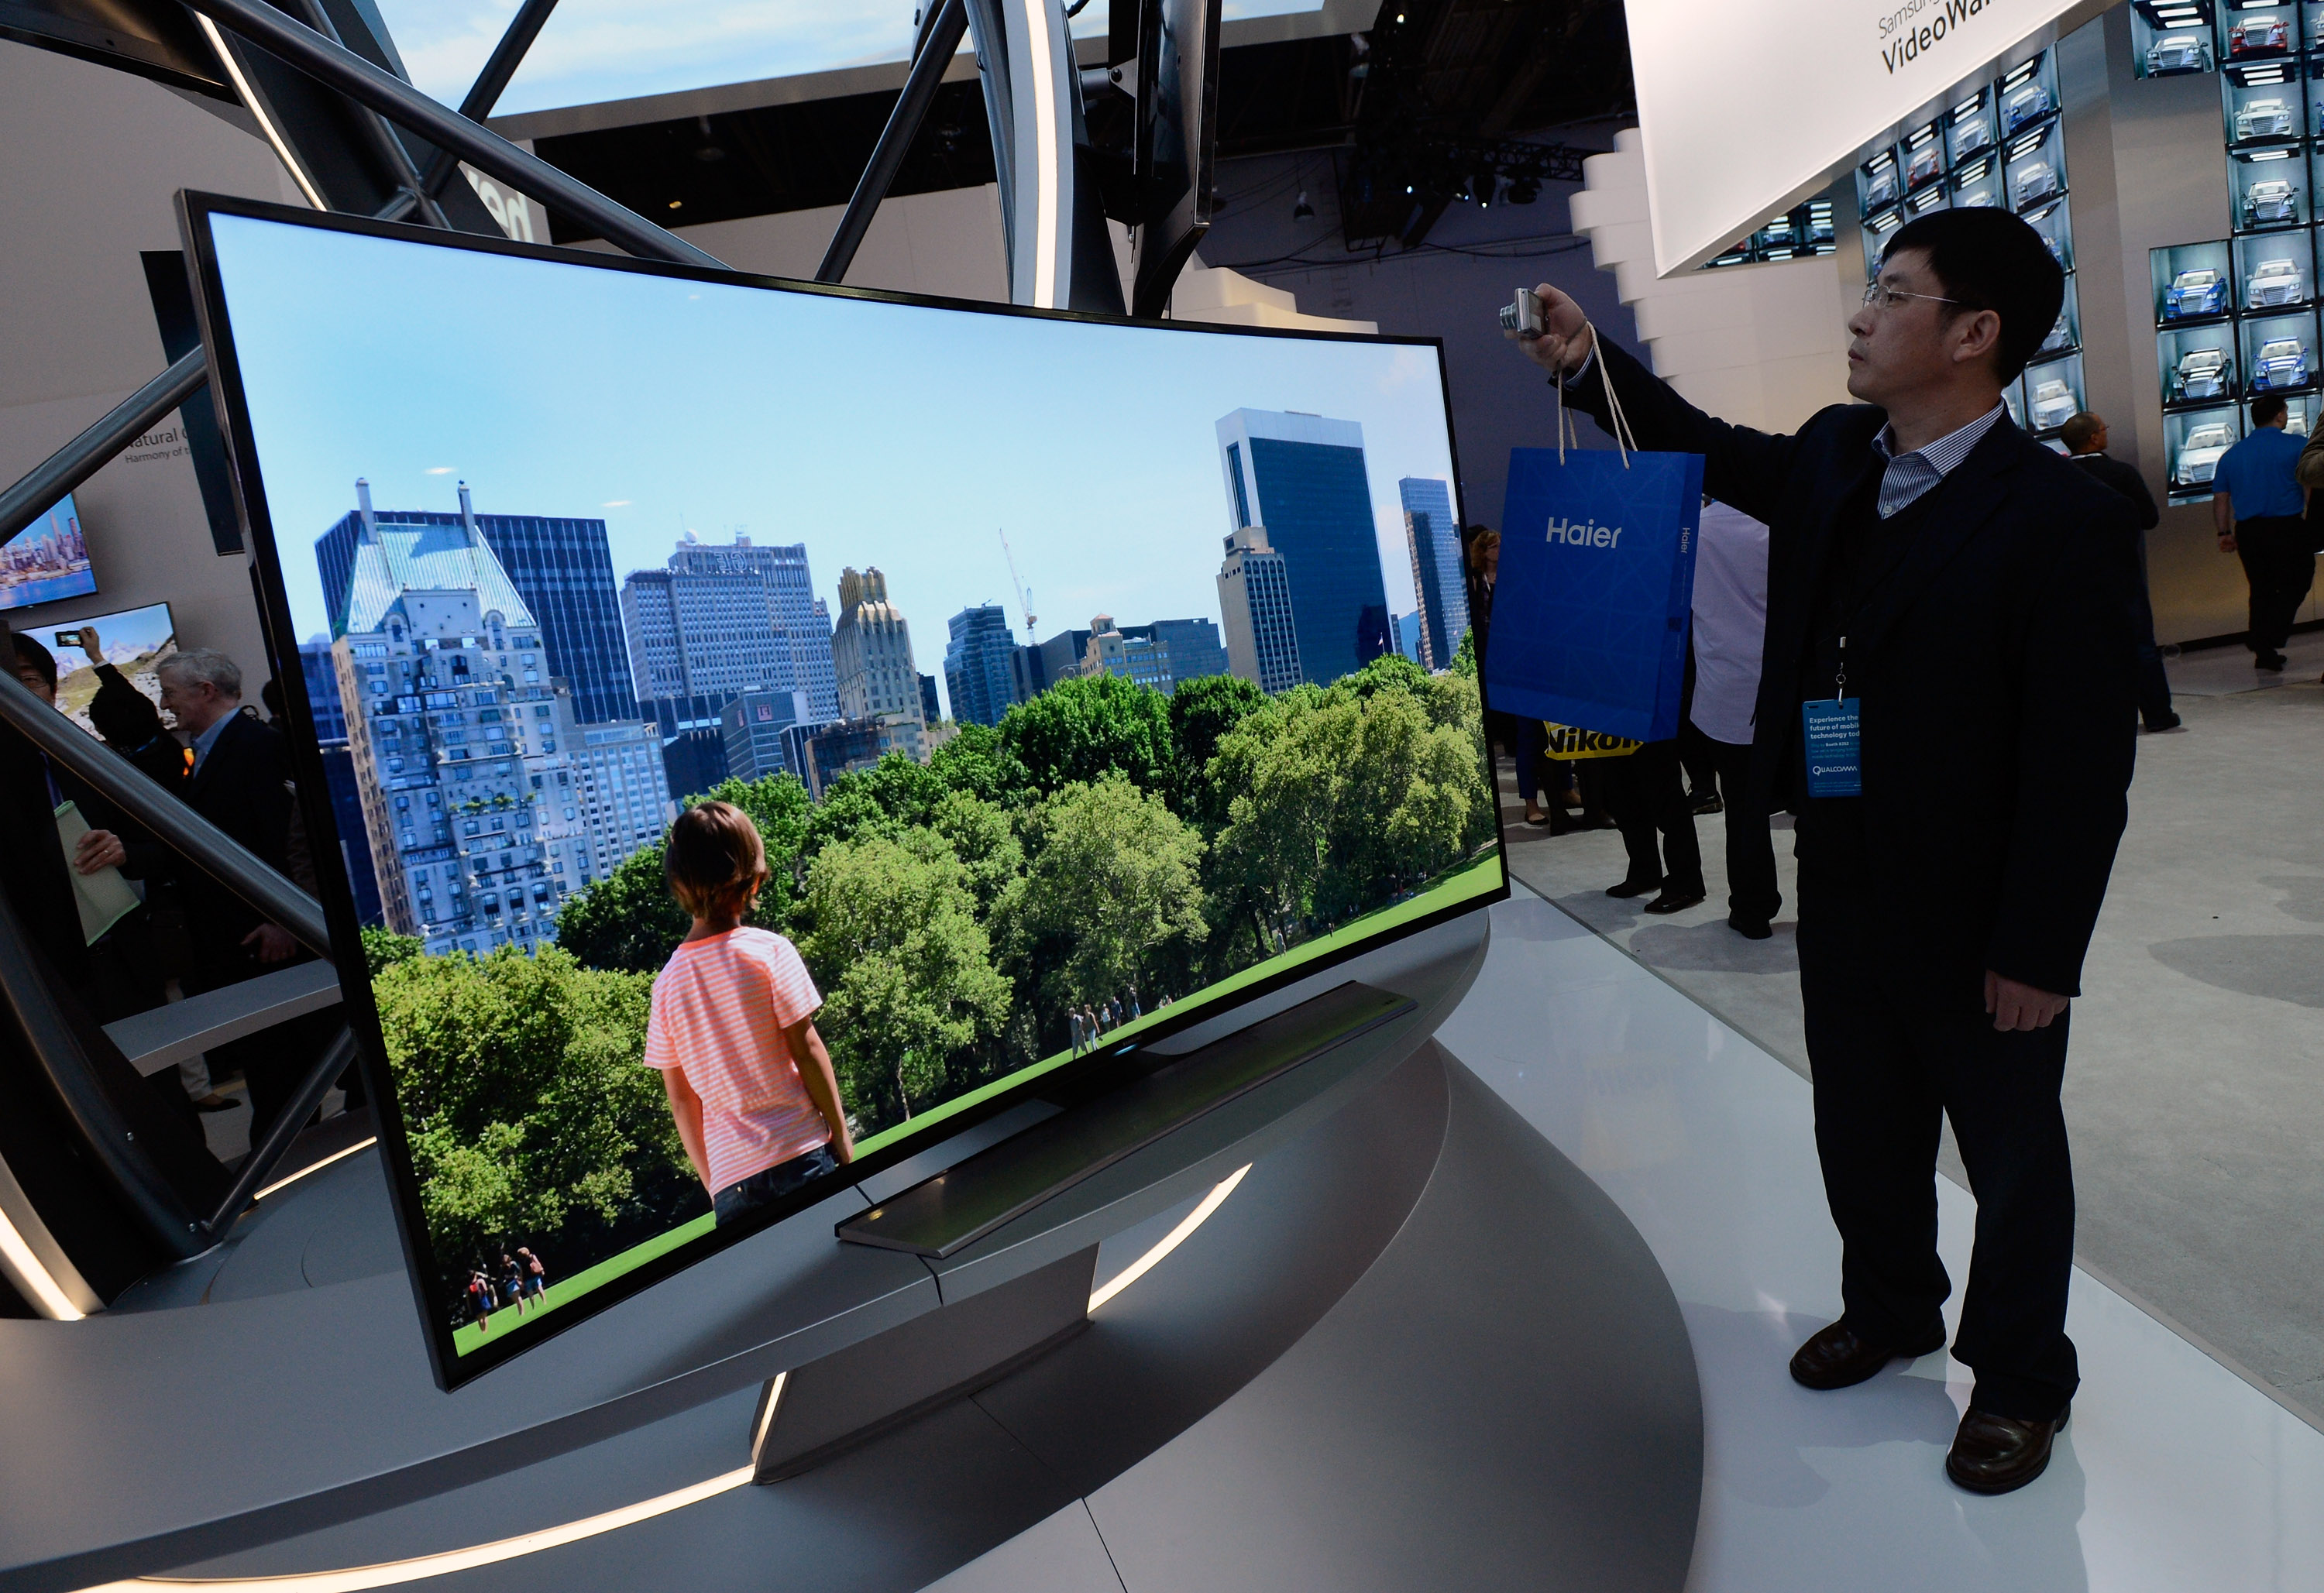 A Samsung curved OLED television is on display at the Samsung booth at the 2014 International CES at the Las Vegas Convention Center on January 7, 2014 in Las Vegas, Nevada. (David Becker&mdash;Getty Images)